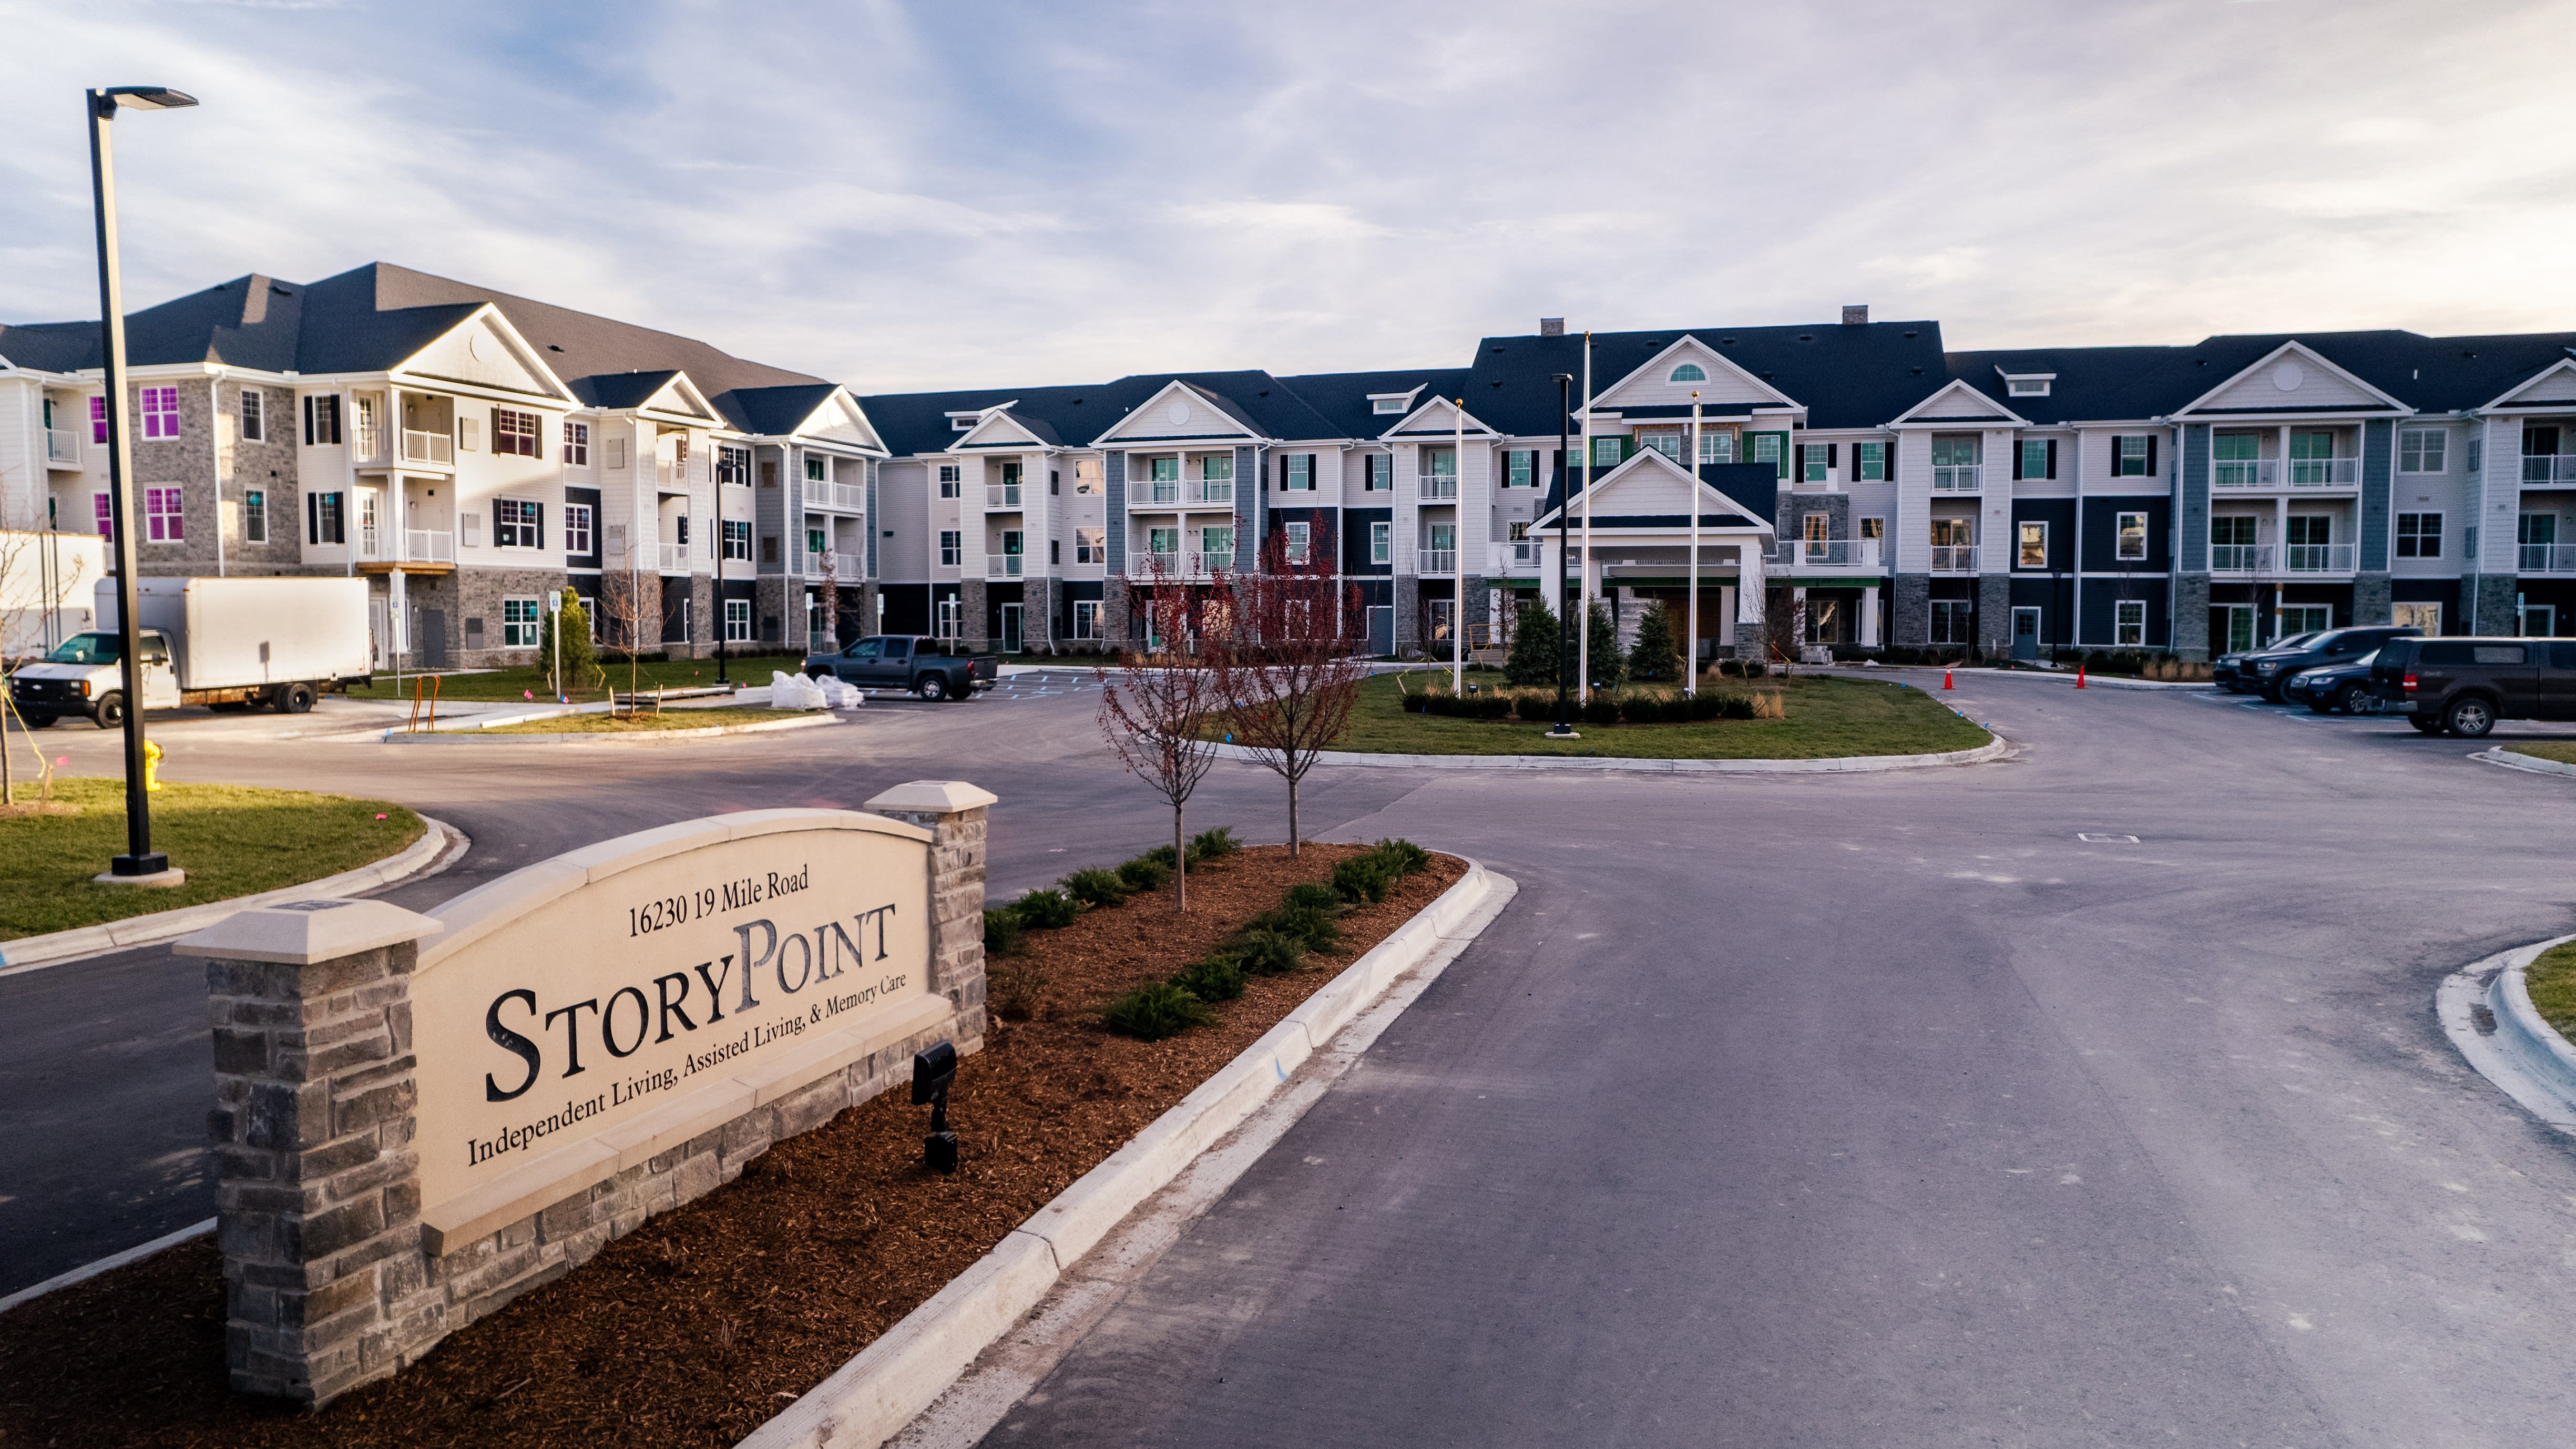 StoryPoint Clinton Township